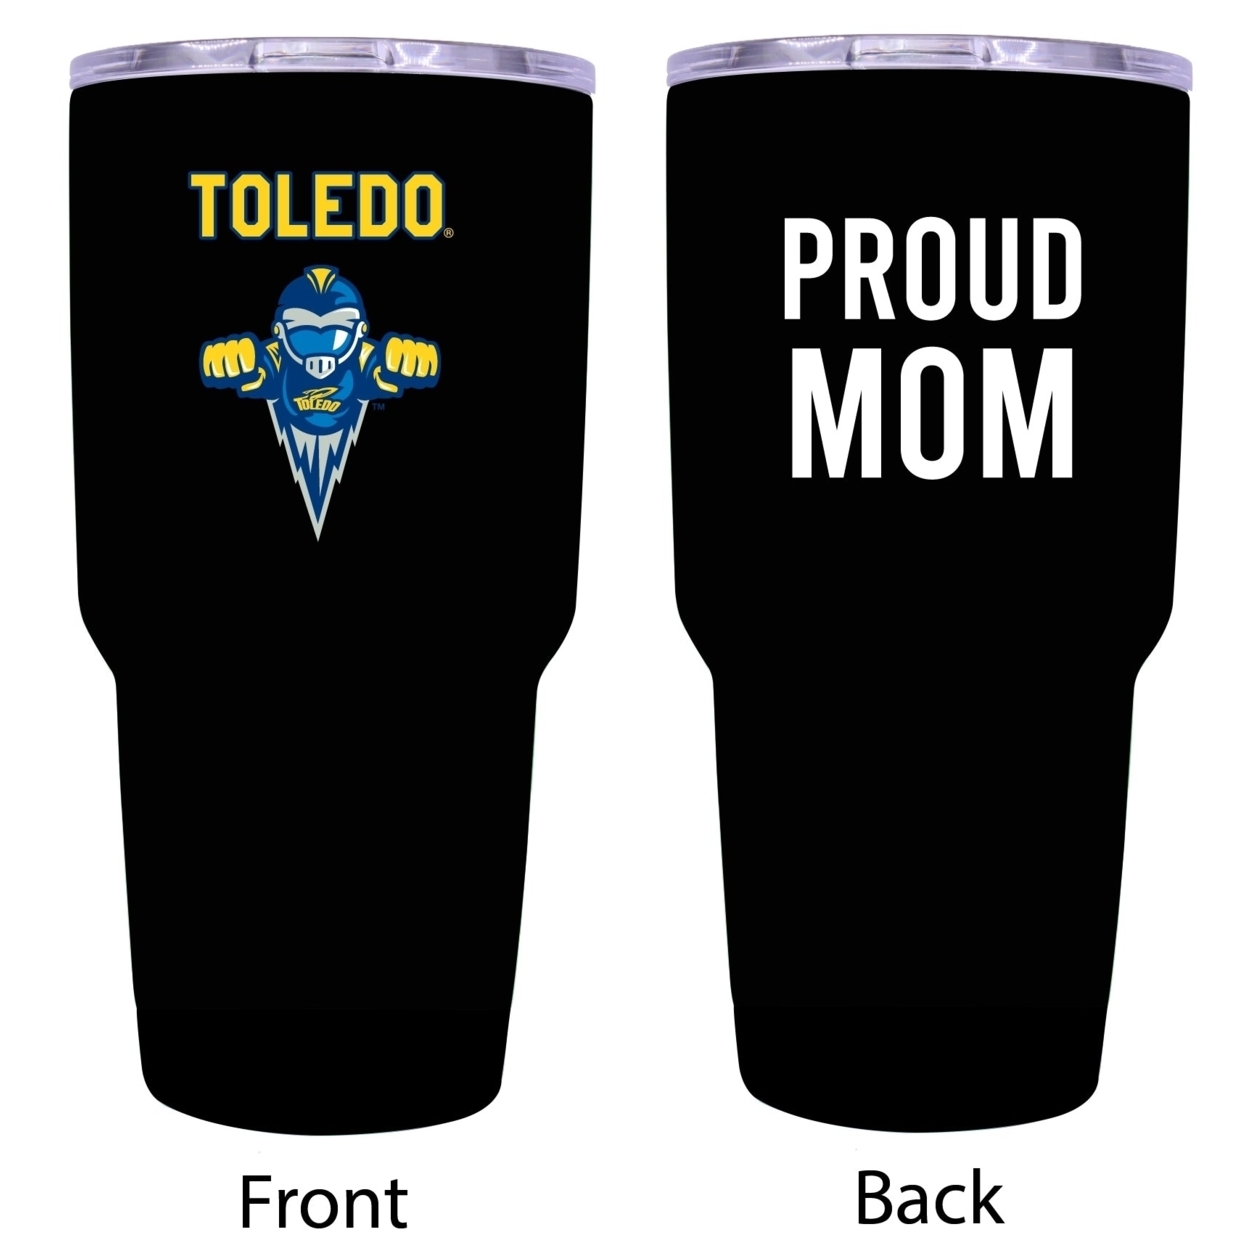 Toledo Rockets Proud Mom 24 Oz Insulated Stainless Steel Tumblers Choose Your Color. - Black